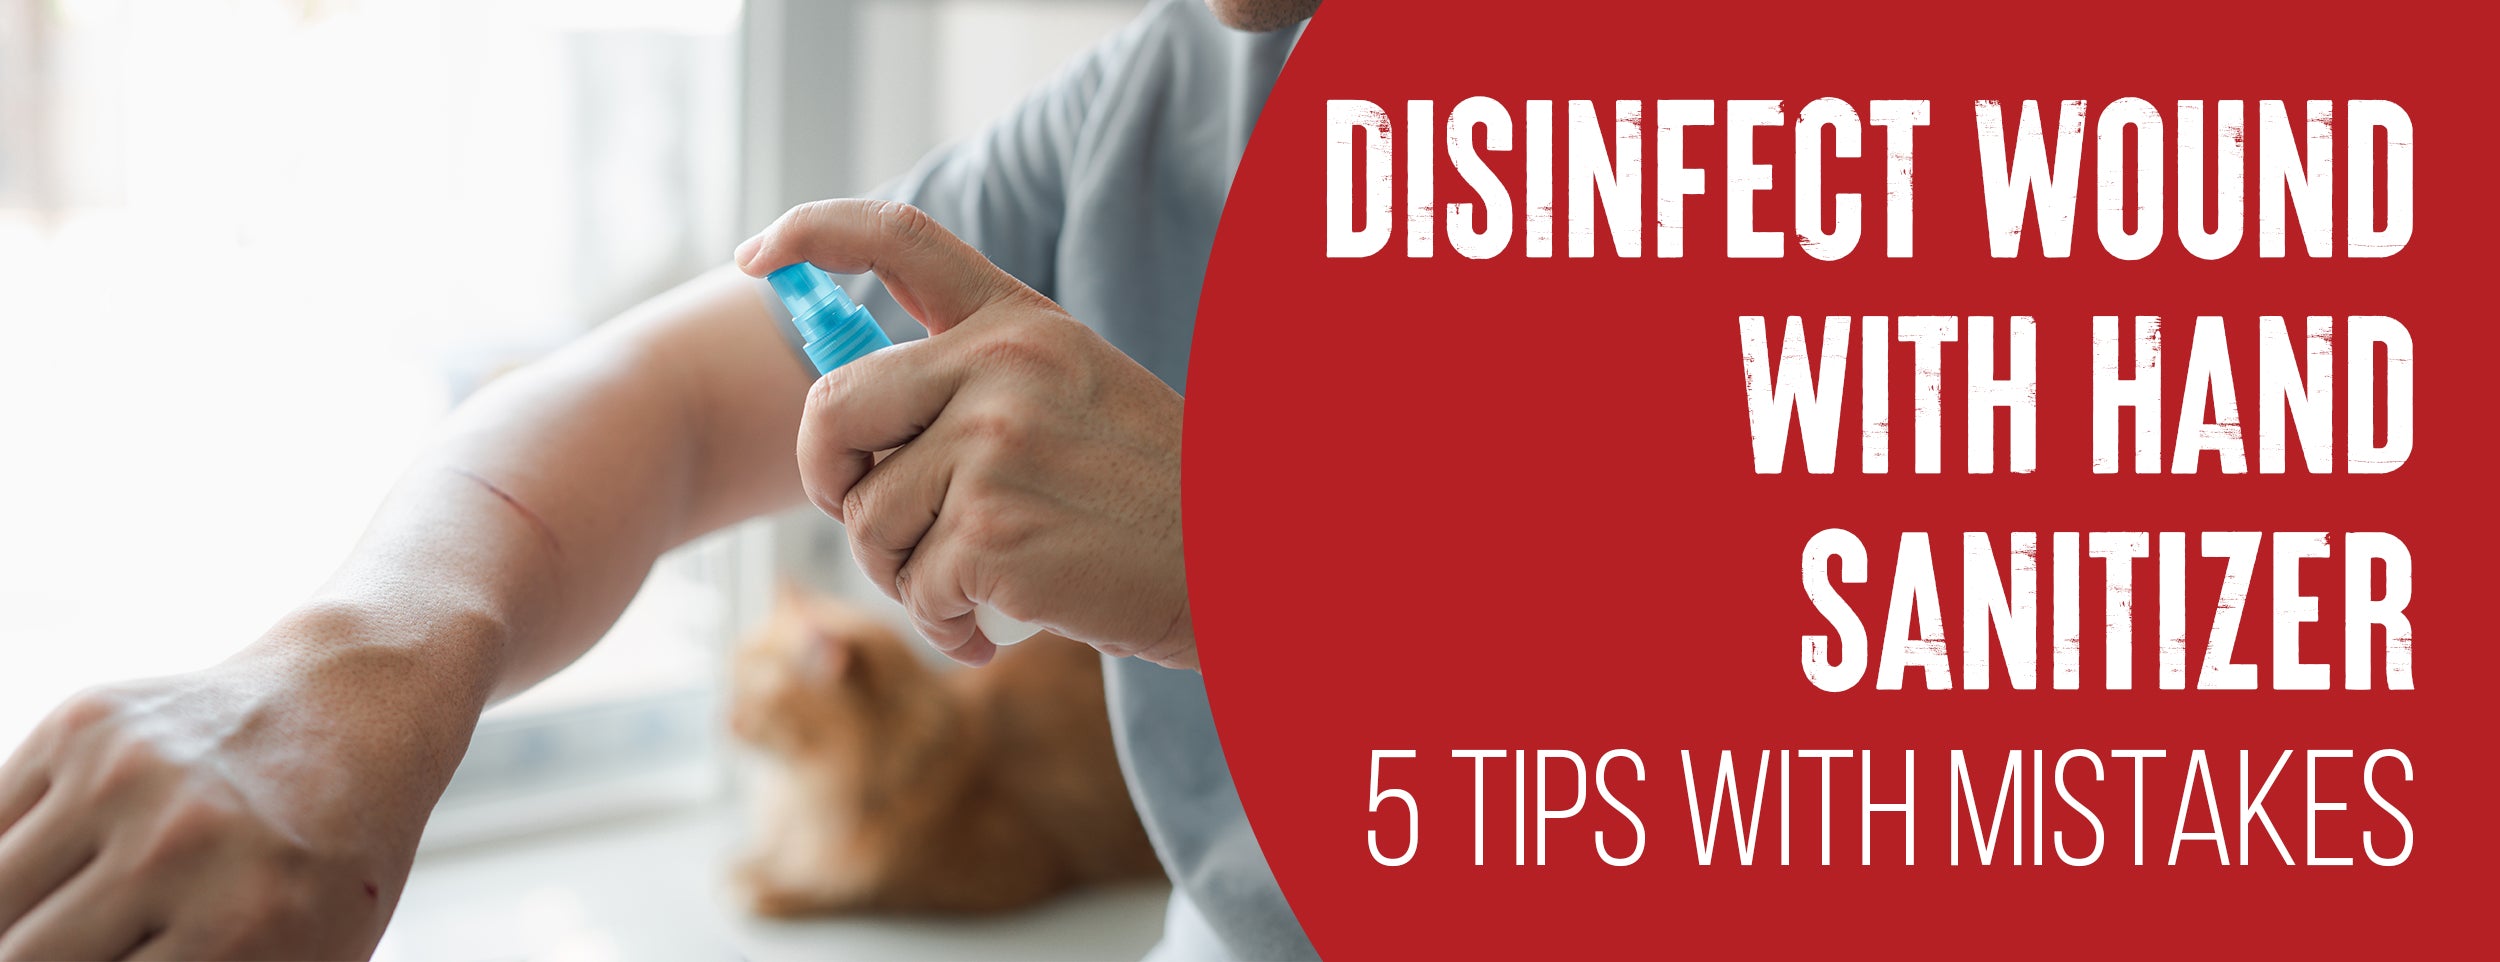 Disinfect Wound with Hand Sanitizer: 5 Using Tips [With Mistakes]